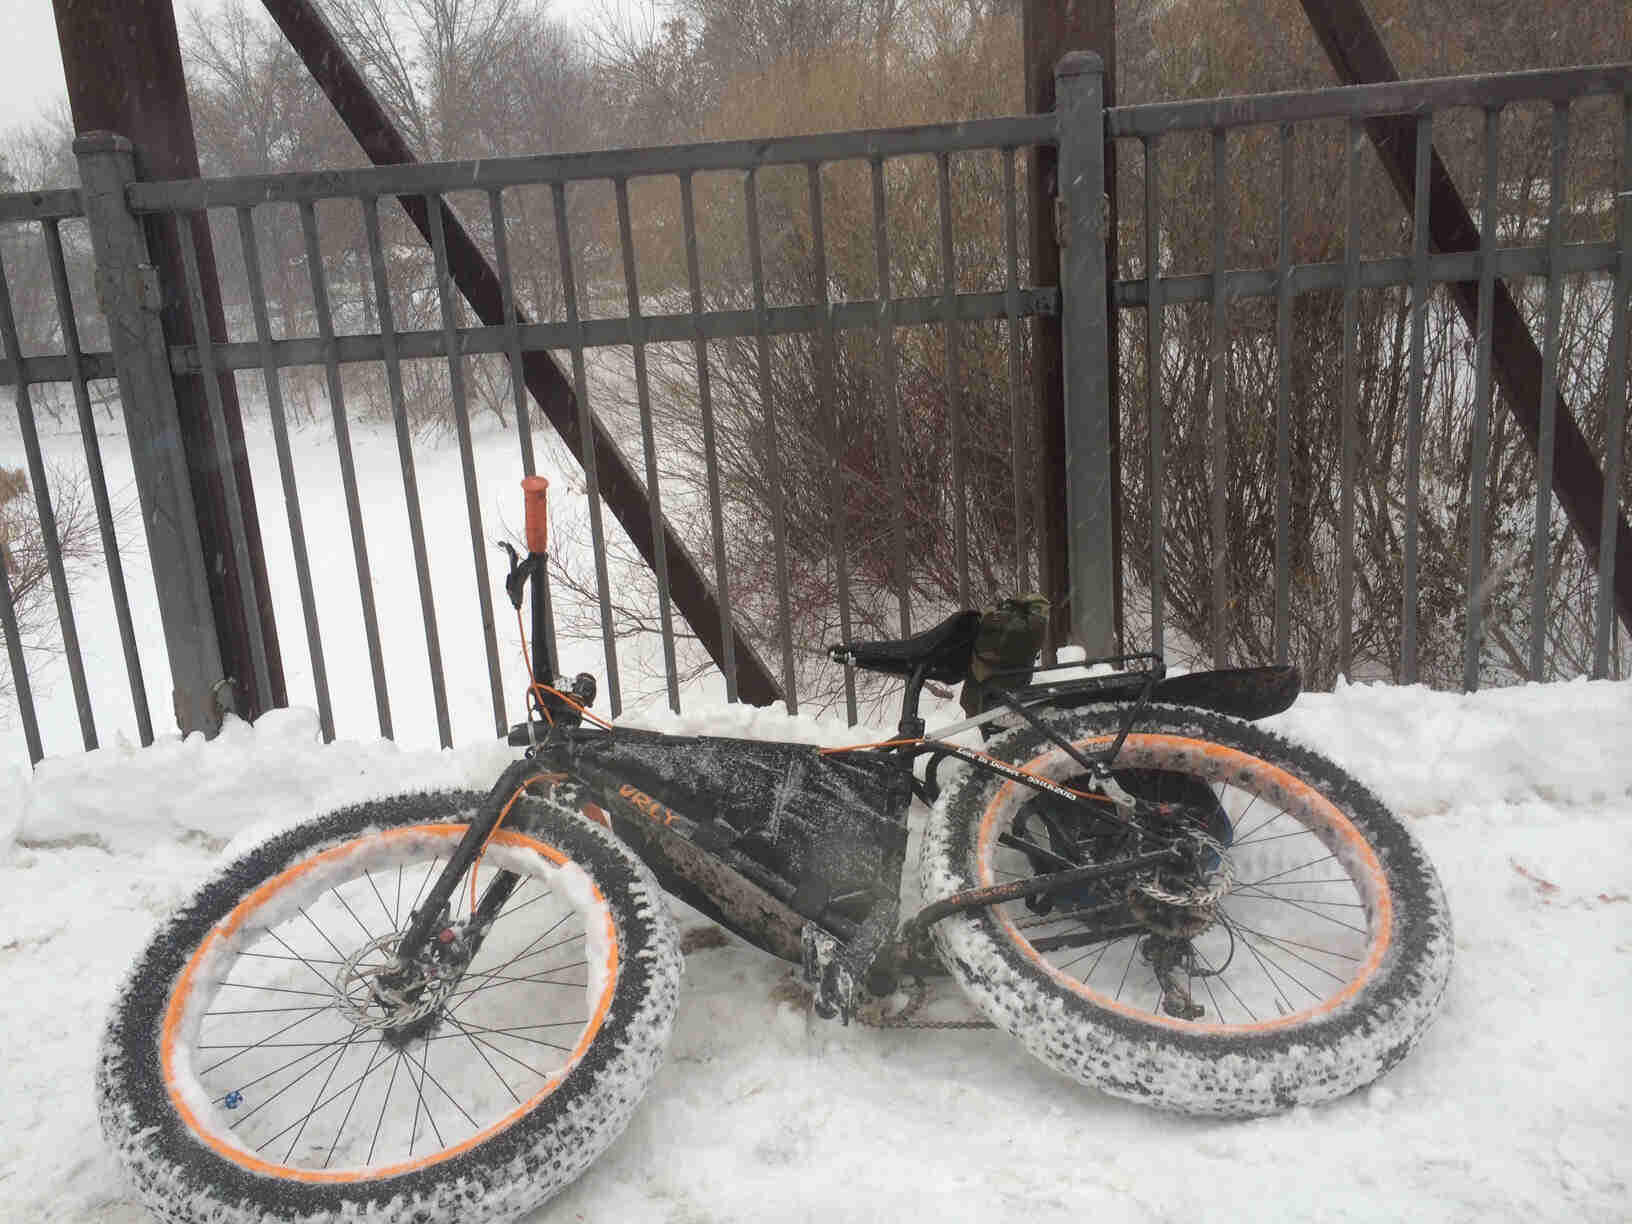 Left side view of a Surly fat bike with orange rims, laying in snow, on a snow covered bridge with a frozen river below